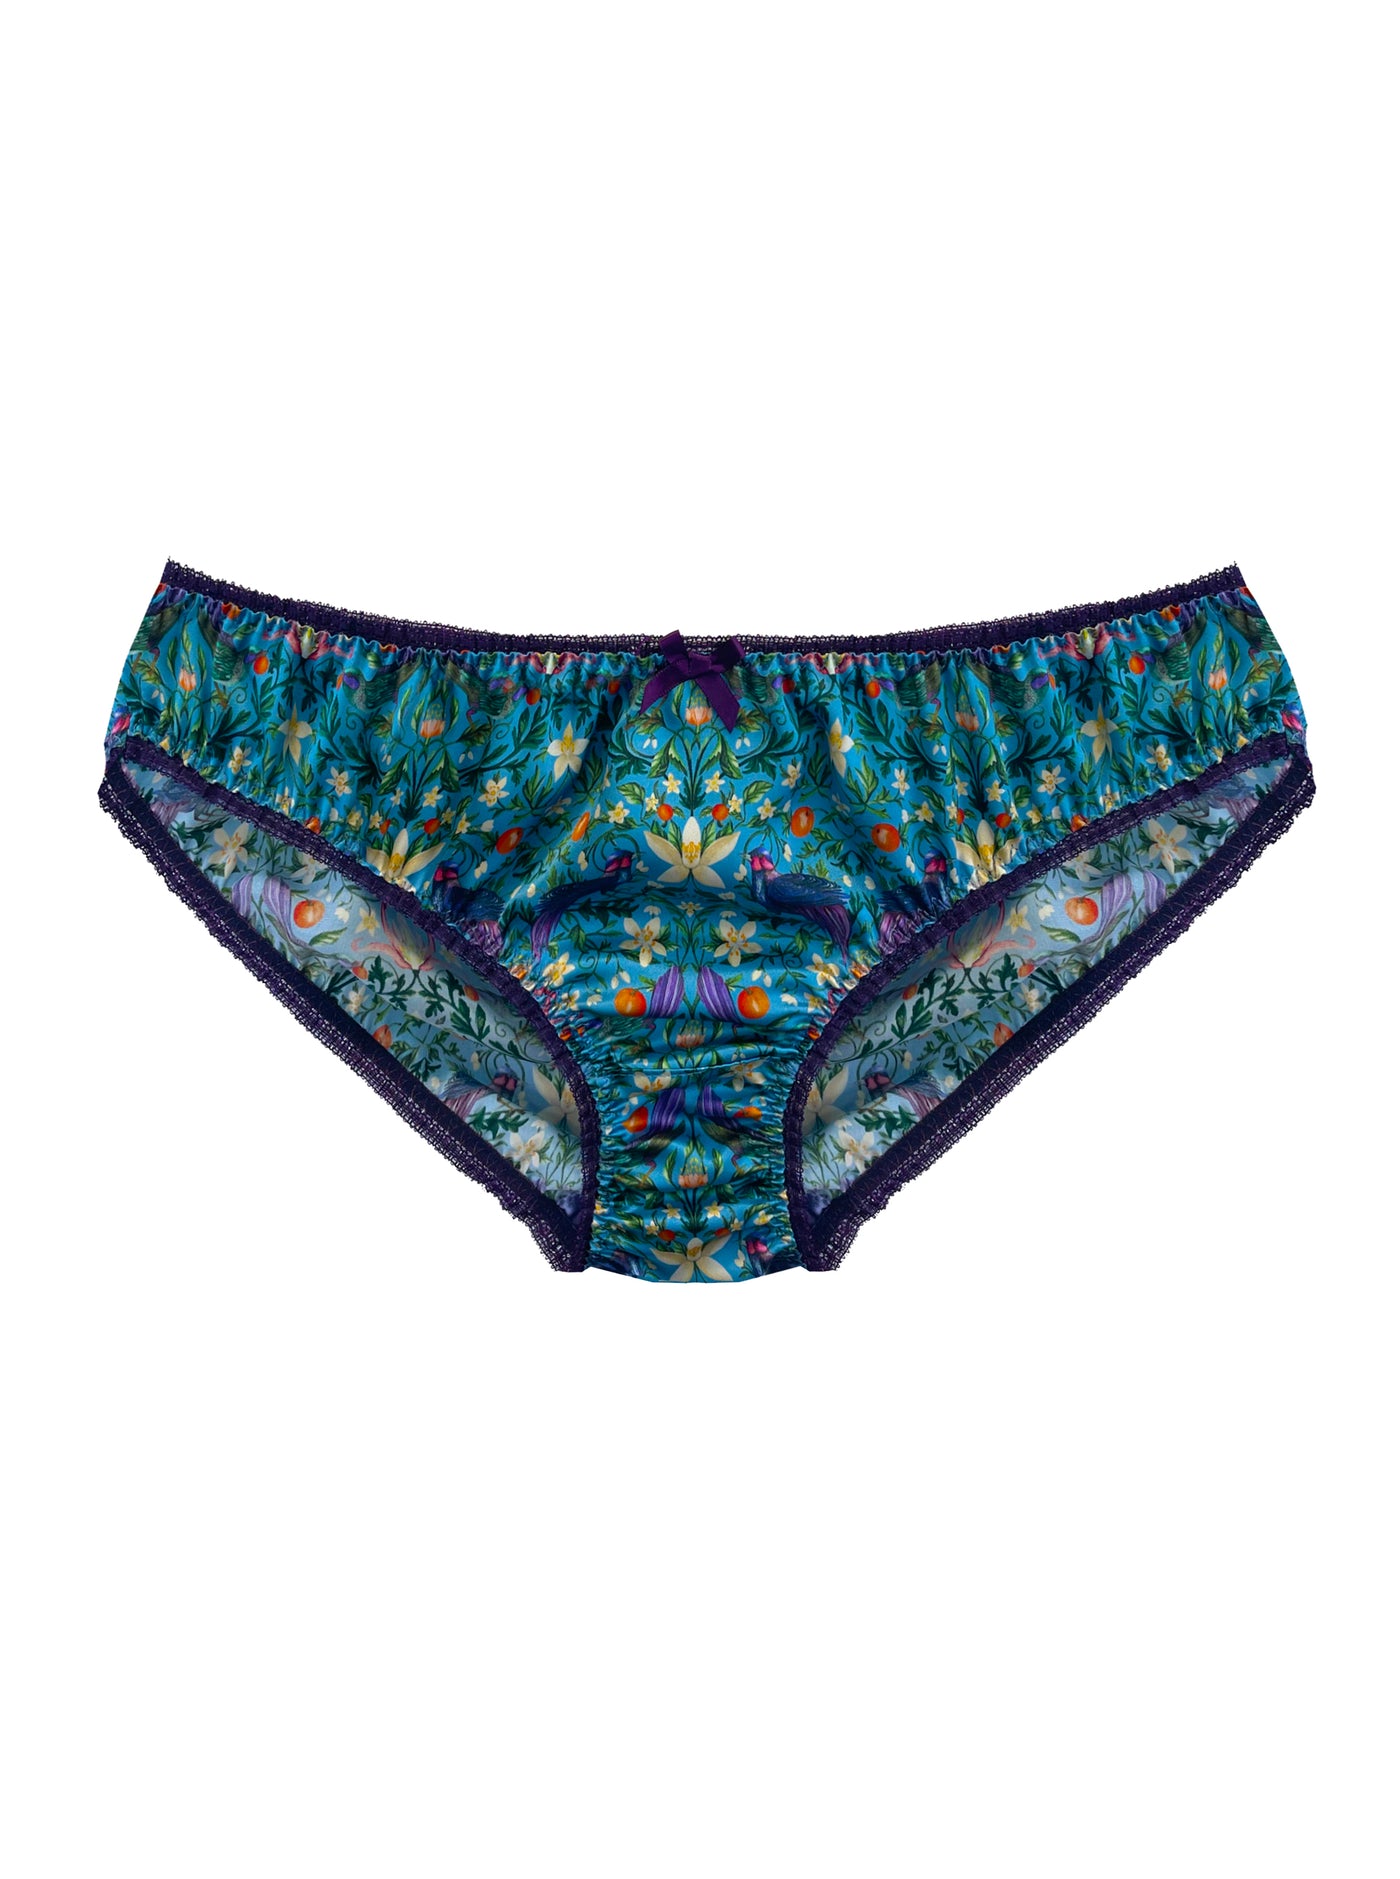 Products Forbidden Orchard Liberty Silk Knicker by Ayten Gasson